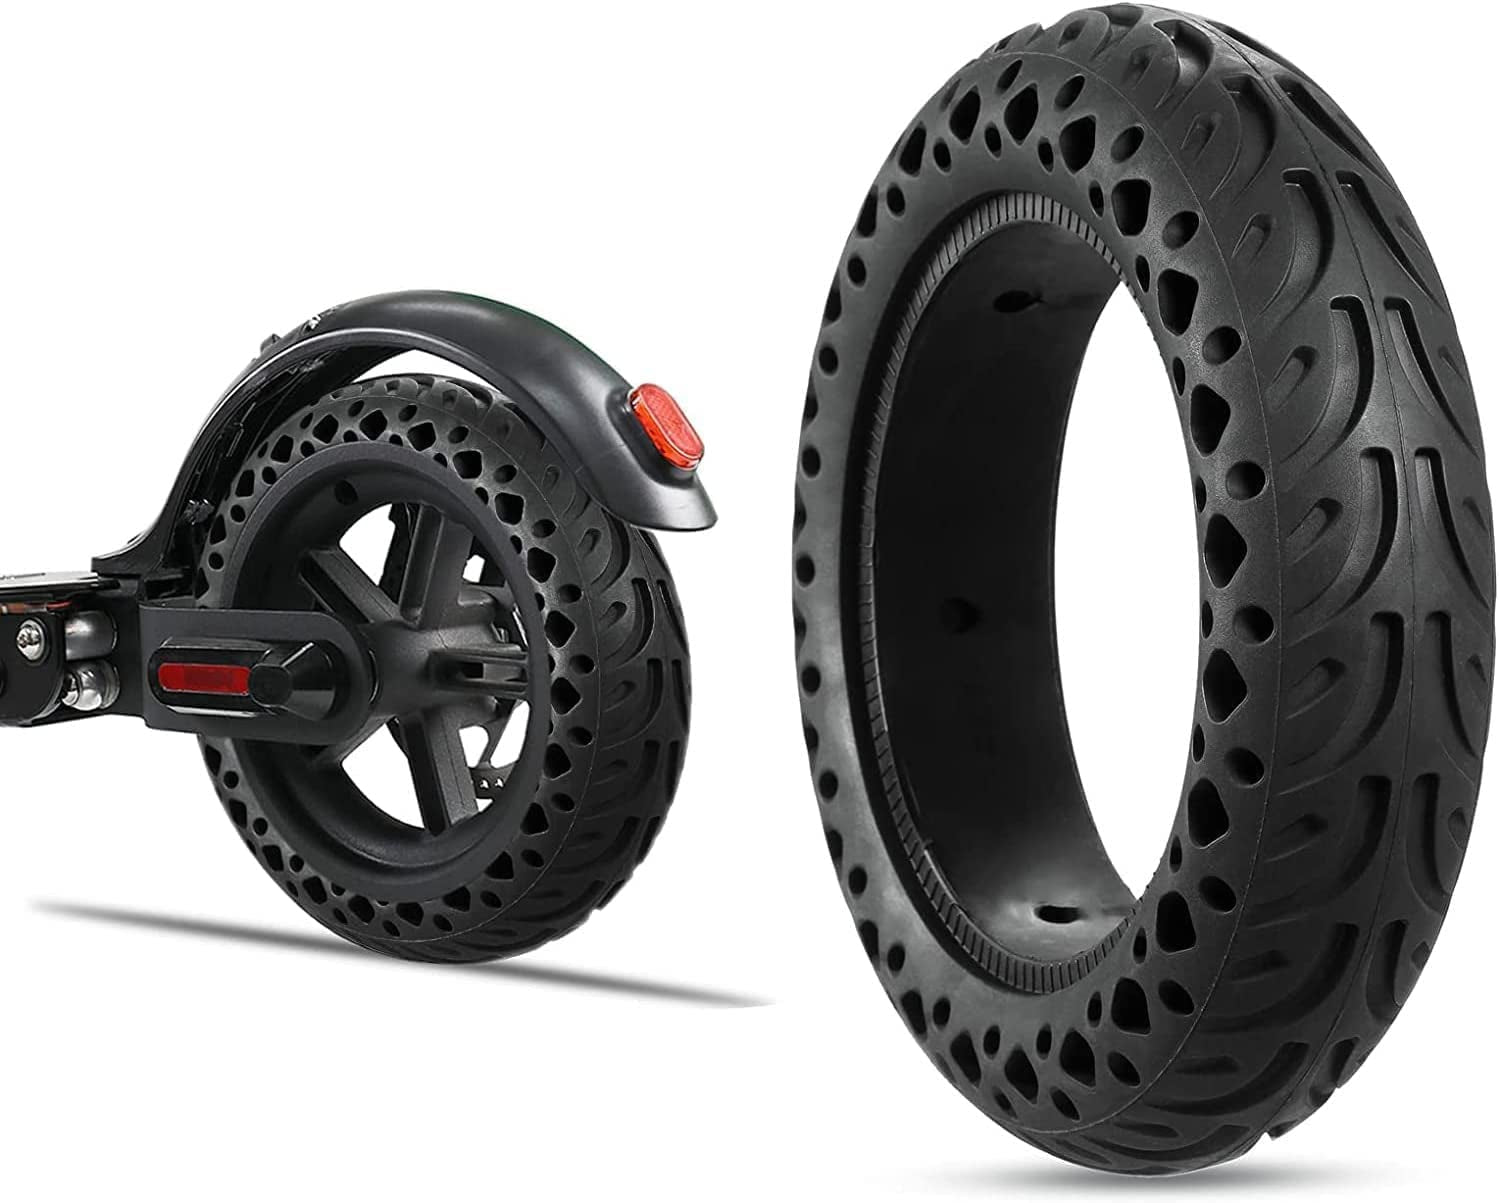 stio Rubber Solid Tire 10x2.125 inch for Gotrax G4,TurboAnt X7 Max / X7 Pro  KickScooter Front/Rear Tyre Shock Absorption Honeycomb Explosion-Proof Scooter  Tire Replacement Accessories 2PCS